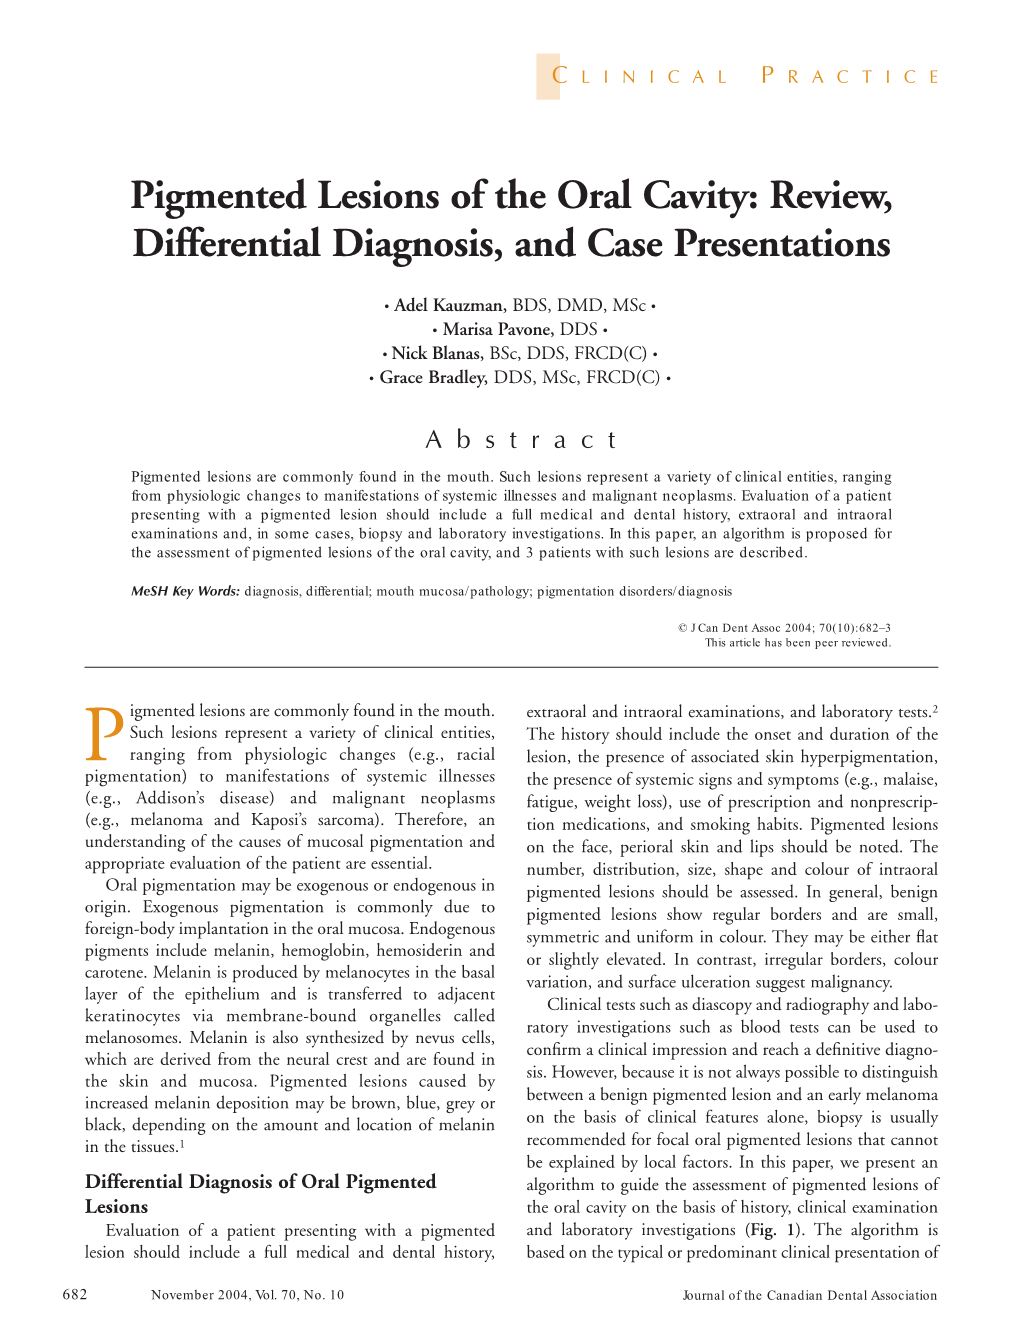 Pigmented Lesions of the Oral Cavity: Review, Differential Diagnosis, and Case Presentations